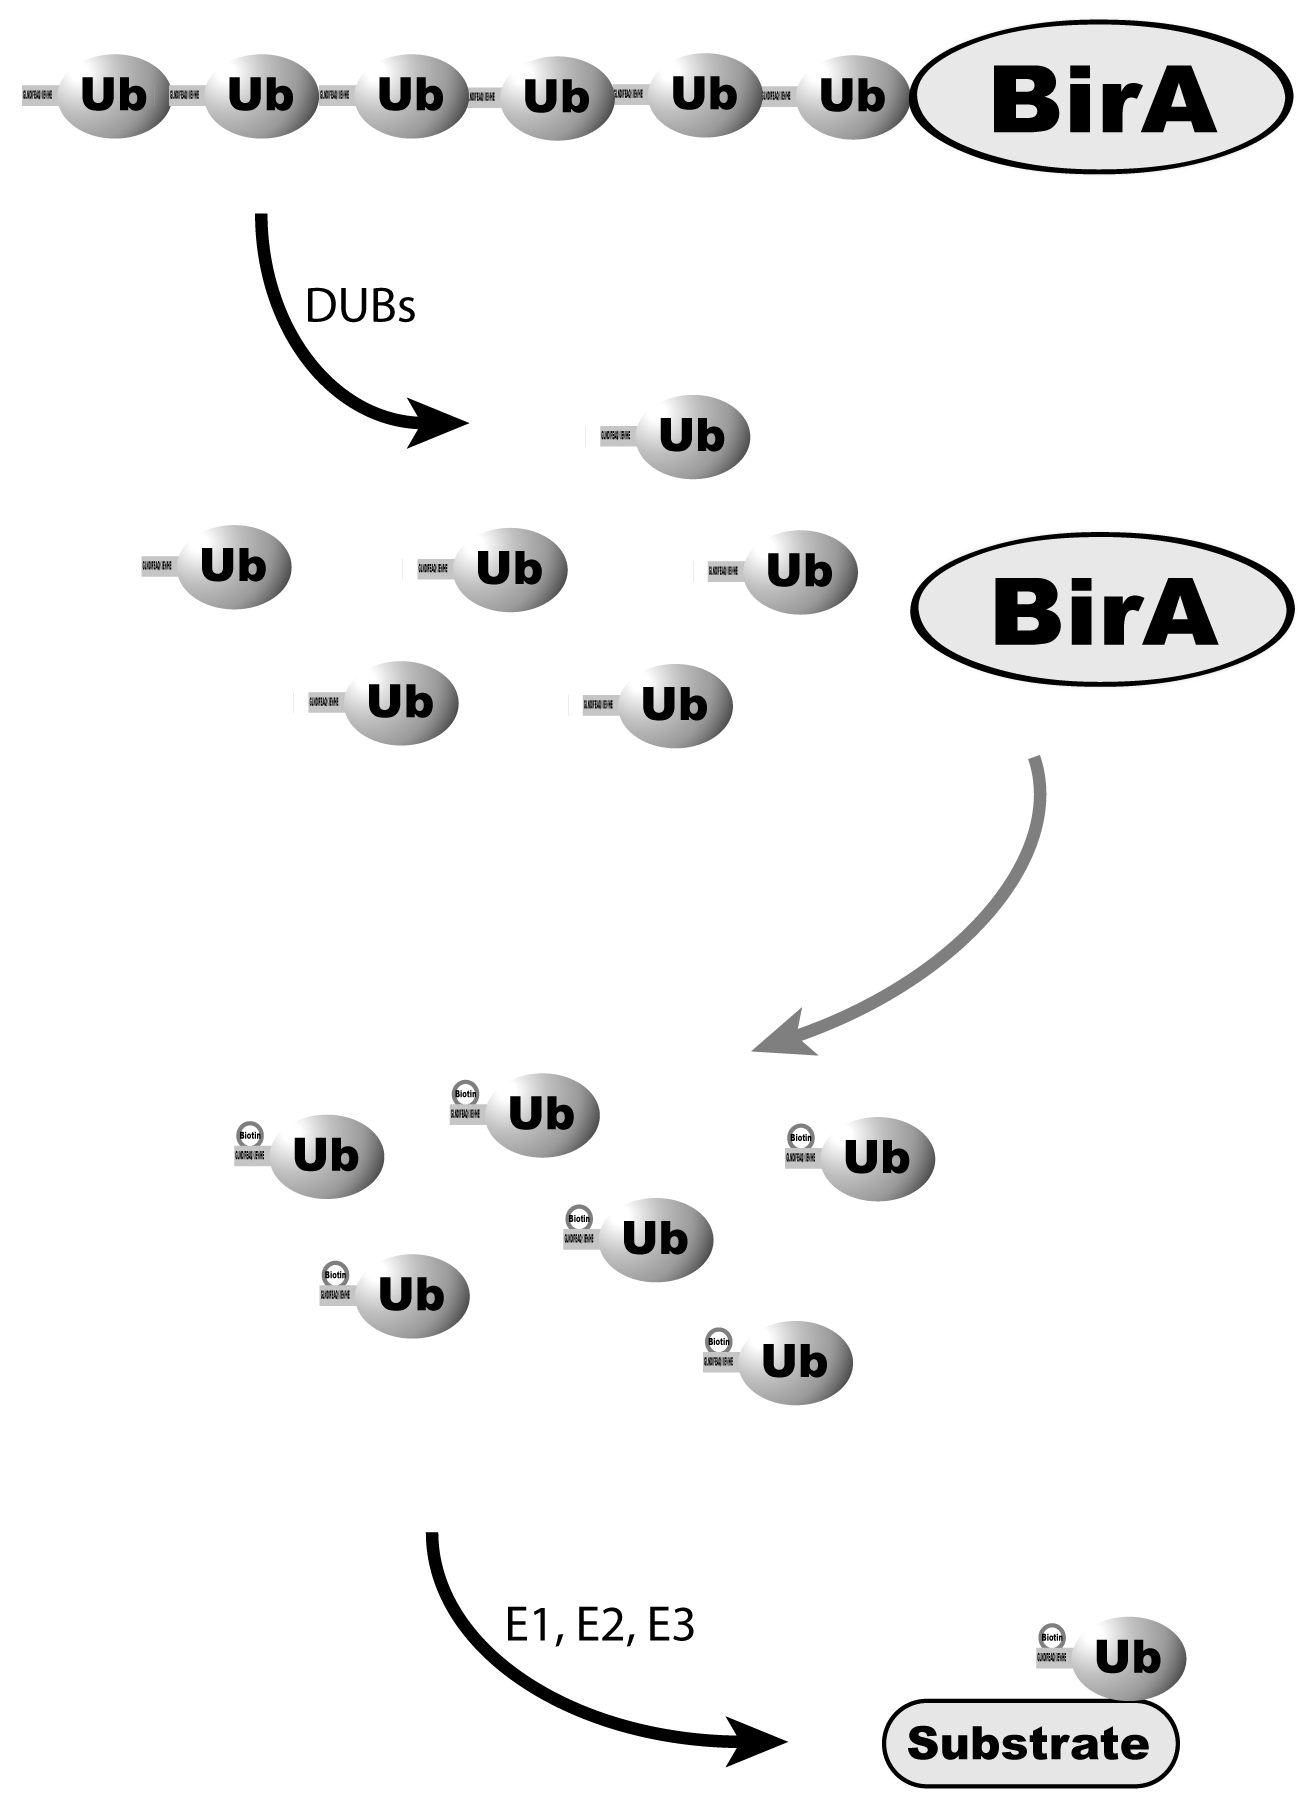 Figure of tagging proteins with biotinylated ubiquitins originating in Franco et al. (2011). A Novel Strategy to Isolate Ubiquitin Conjugates Reveals Wide Role for Ubiquitination during Neural Development. Mol. Cell. Proteomics 10: M110.002188.